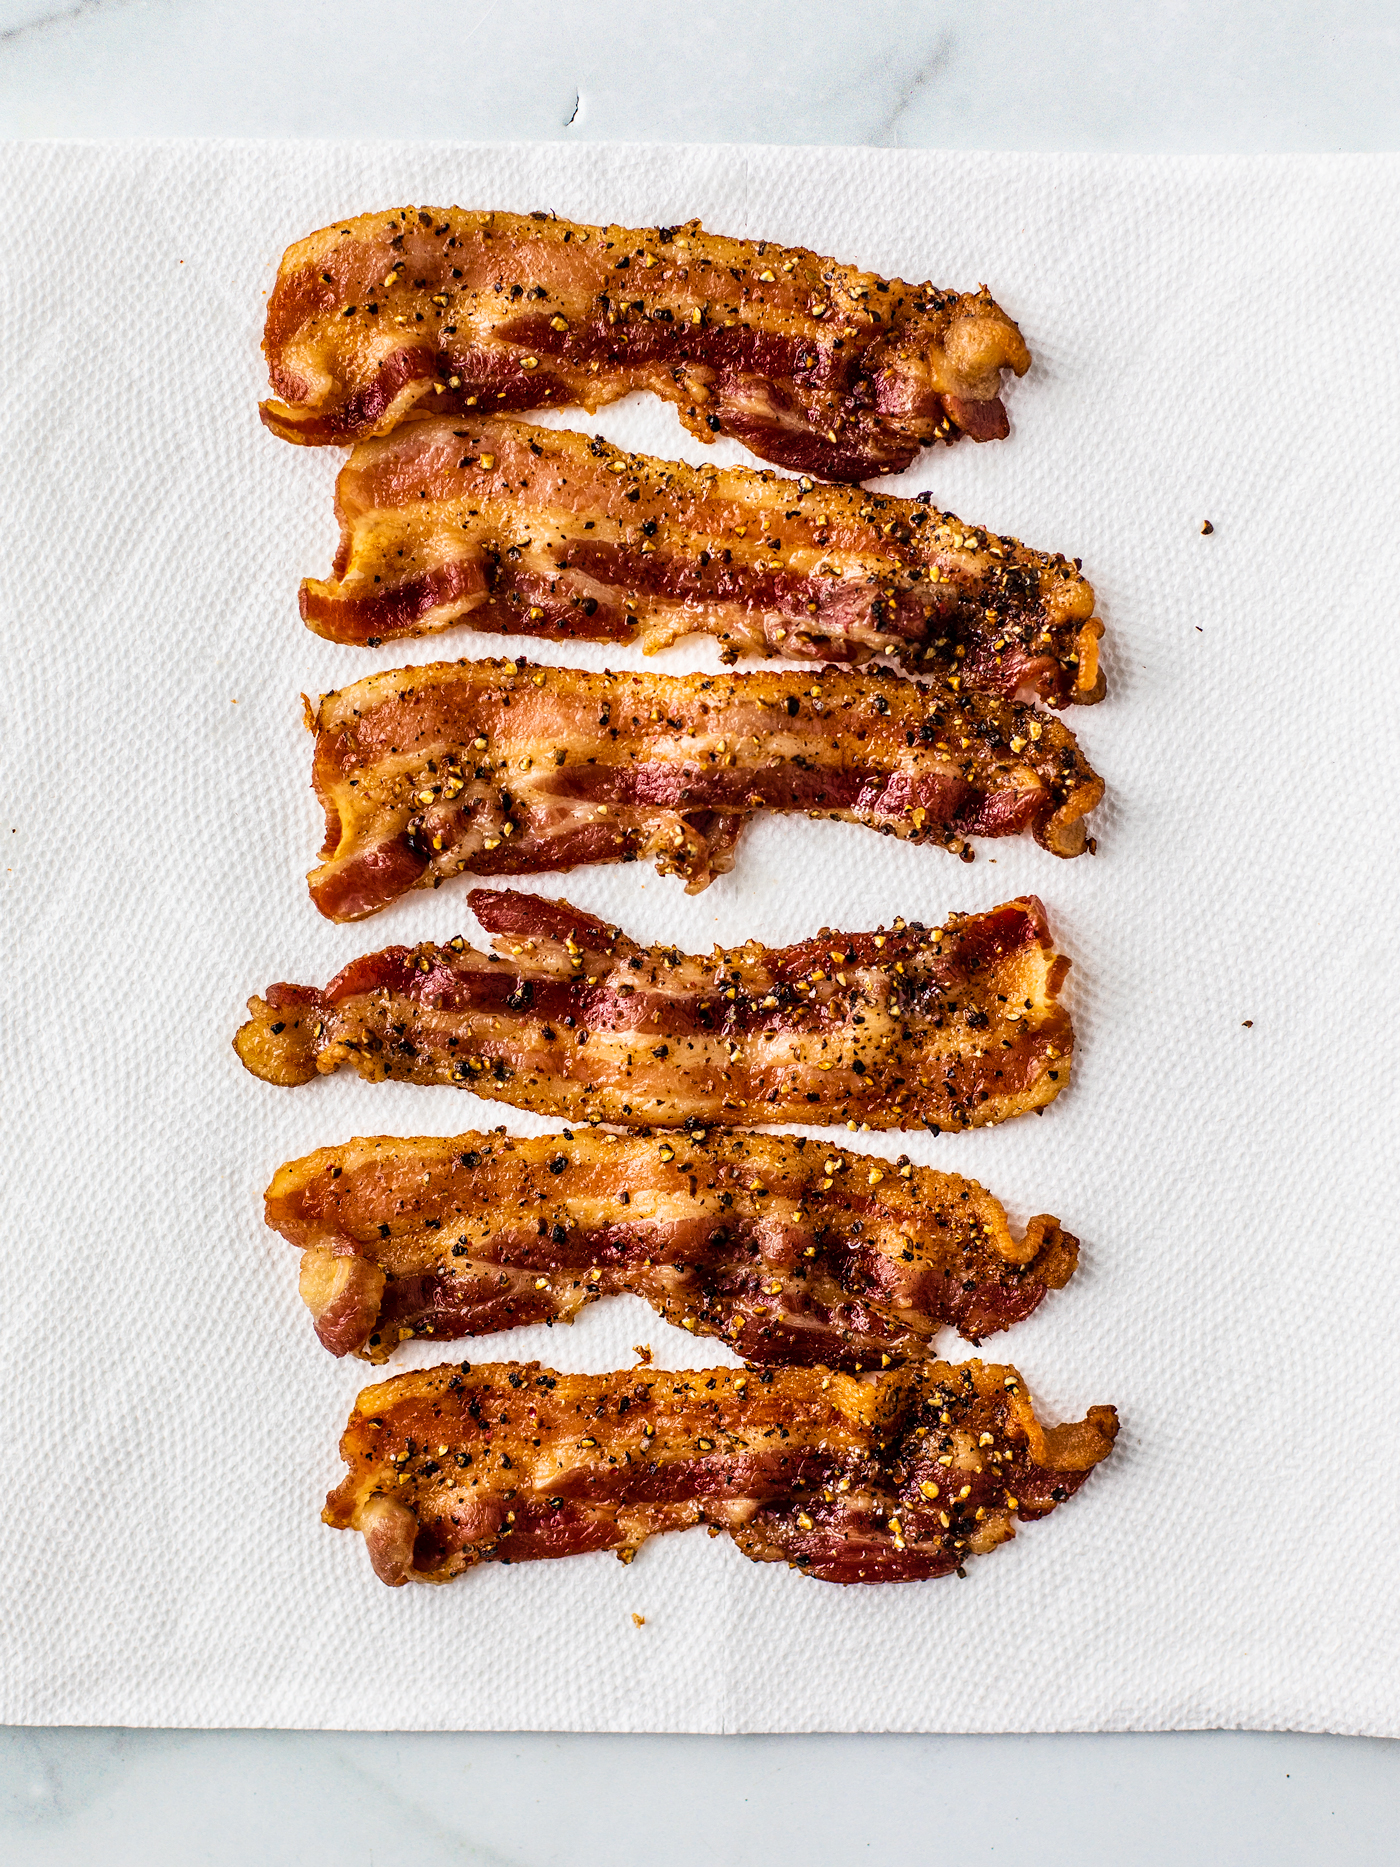 Paper towel with cooked bacon spied with cracked black pepper.